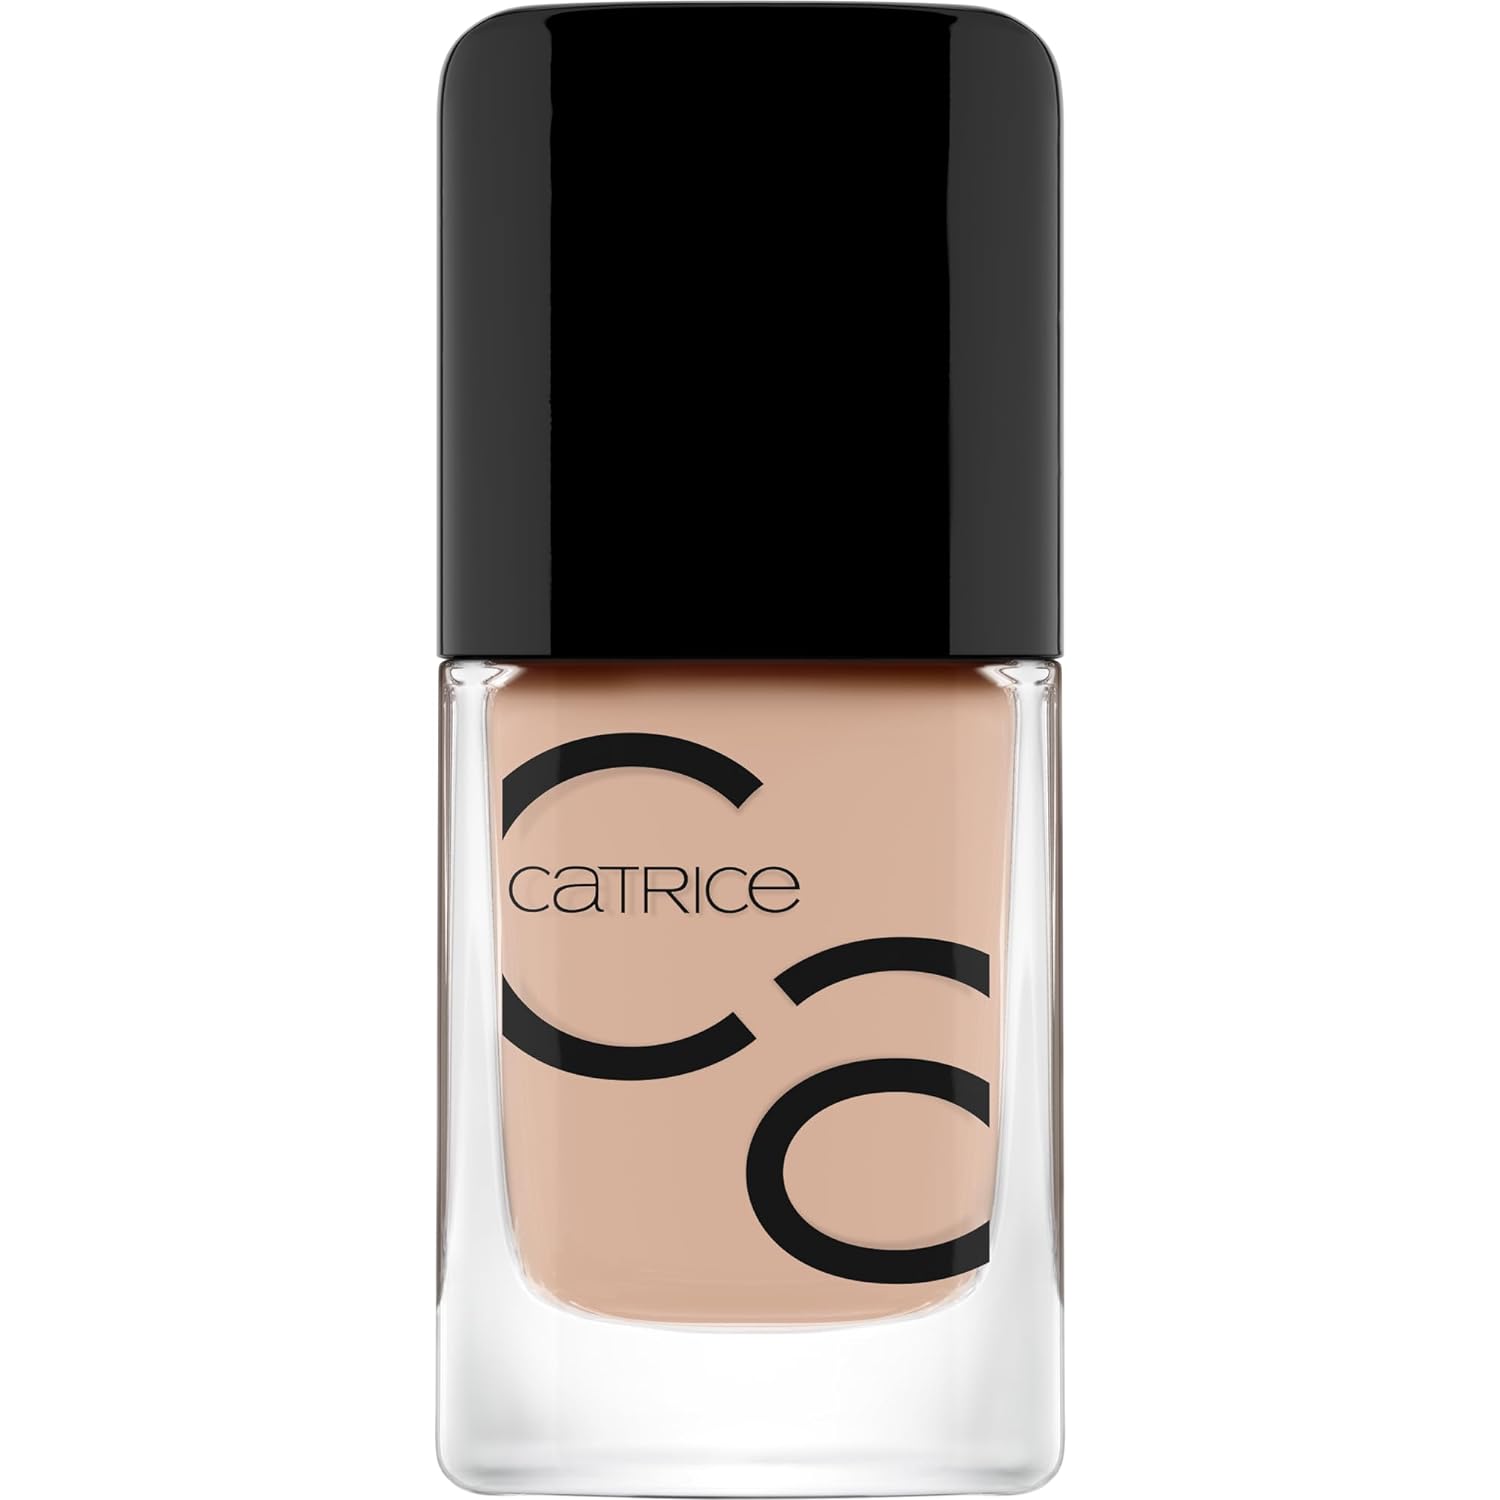 Catrice Catrice Iconails Gel Lacquer, Nail Polish, No. 174, Nude, Long-Lasting, Shiny, Acetone-Free, vegan, no Microplastic Particles, No Preservatives, Pack of 10.5 ml